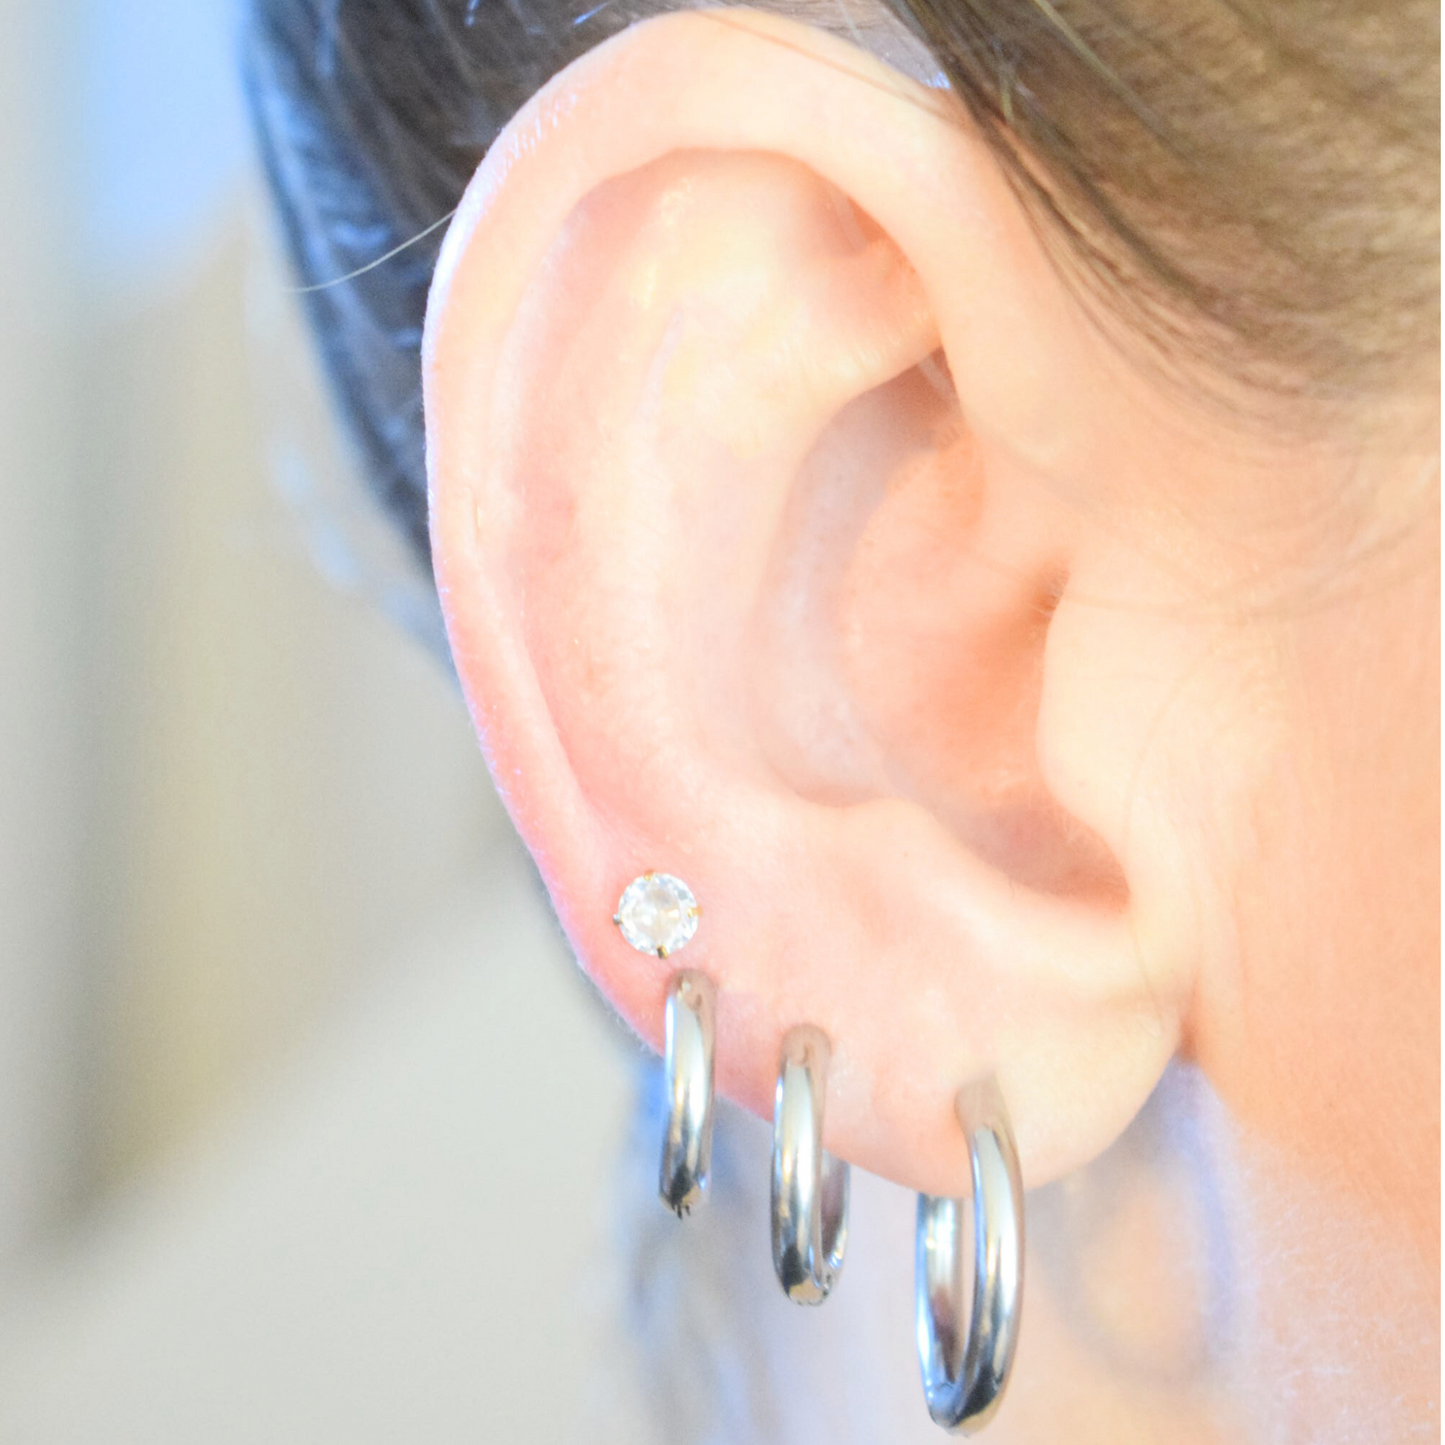 4mm Diamond studs - Silver - TheEarringCollective